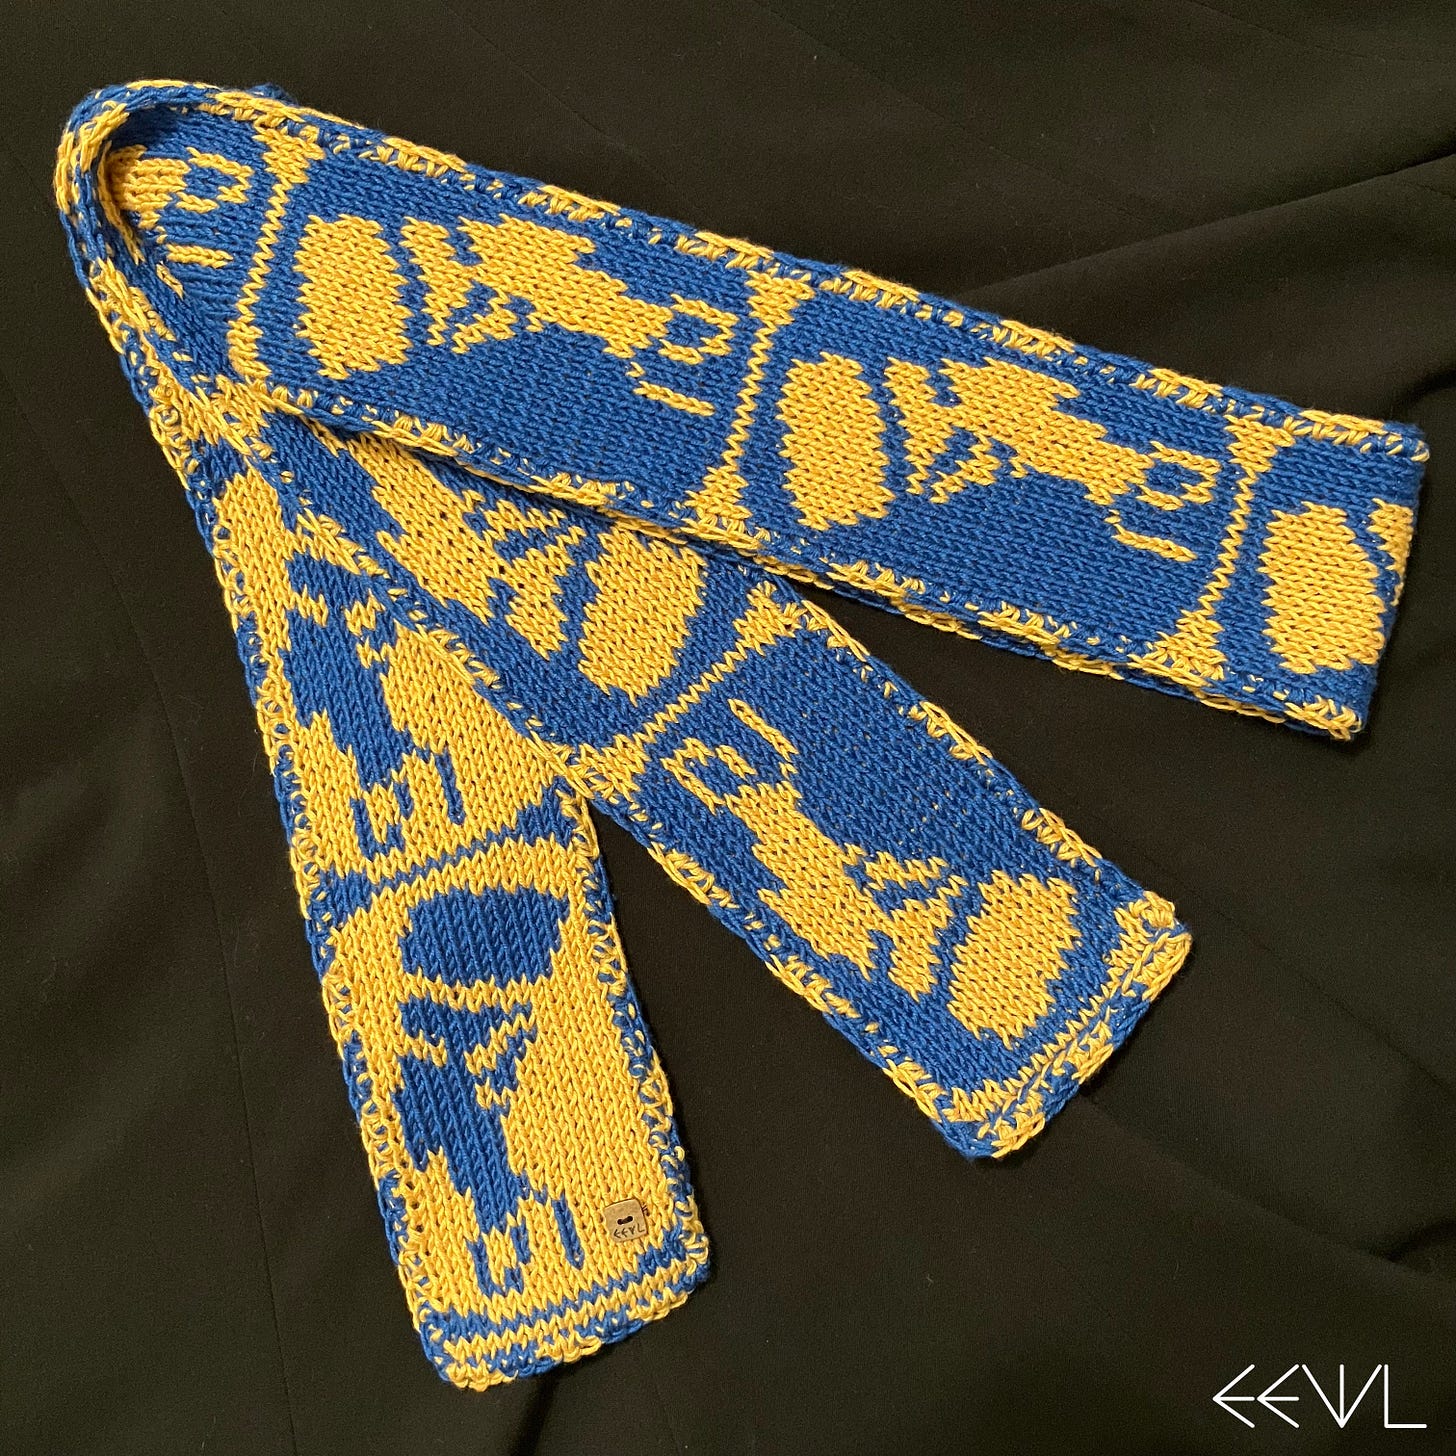 Blue and yellow/gold double-sided hand-knit scarf featuring the portrait bust of Queen Nefertiti in profile. Scarf is folded on a black fabric background.